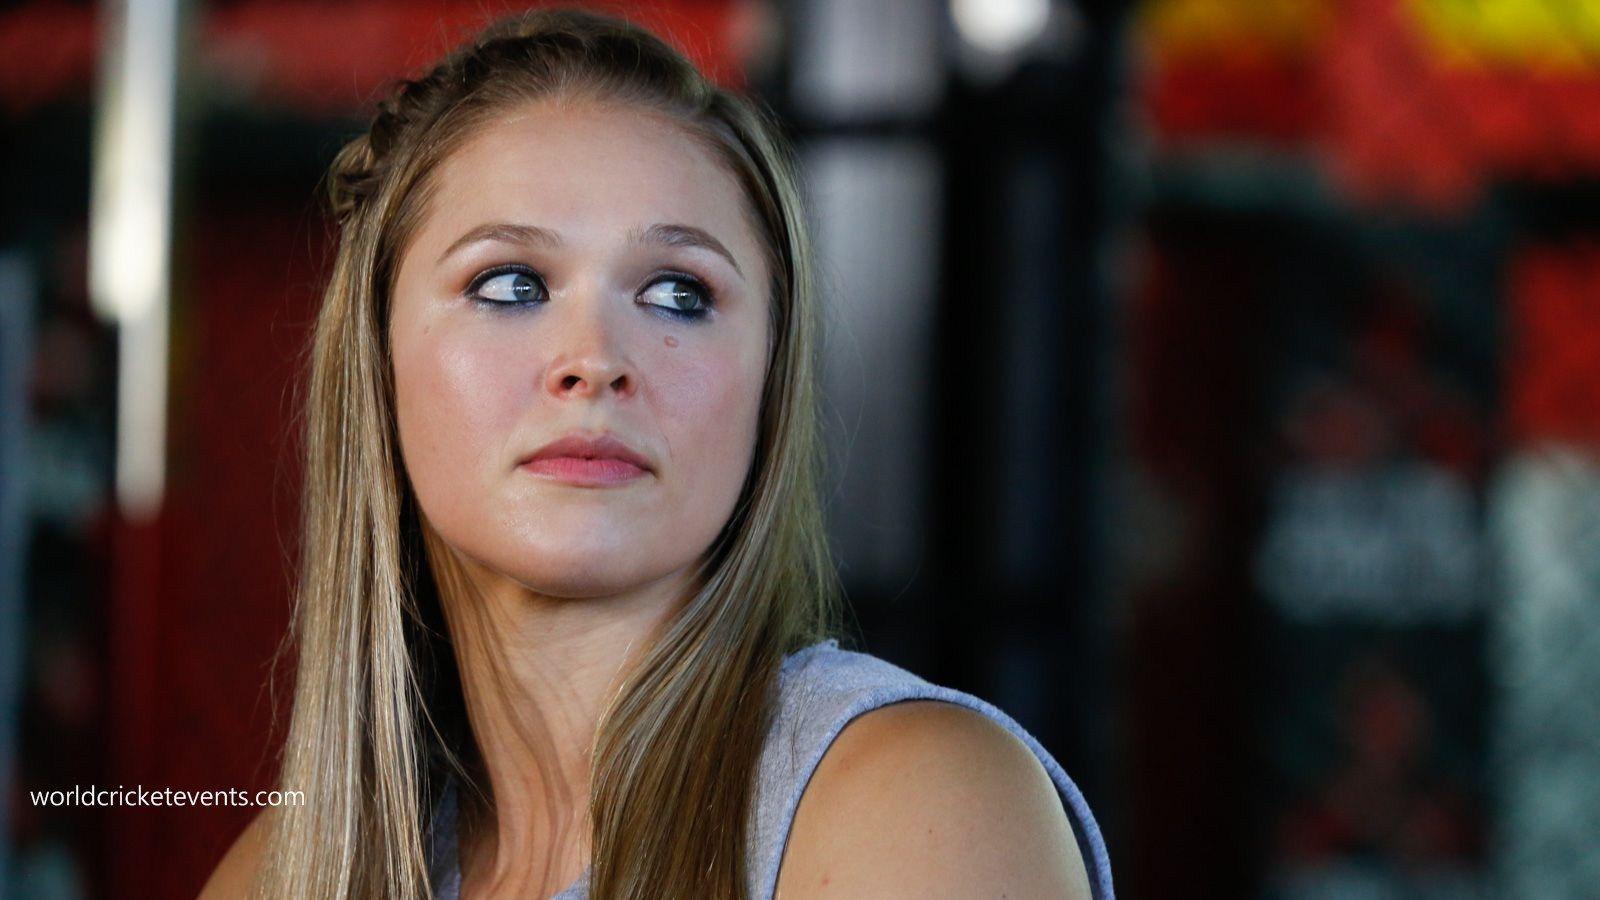 For Your Desktop: Ronda Rousey Wallpapers, 37 Top Quality Ronda